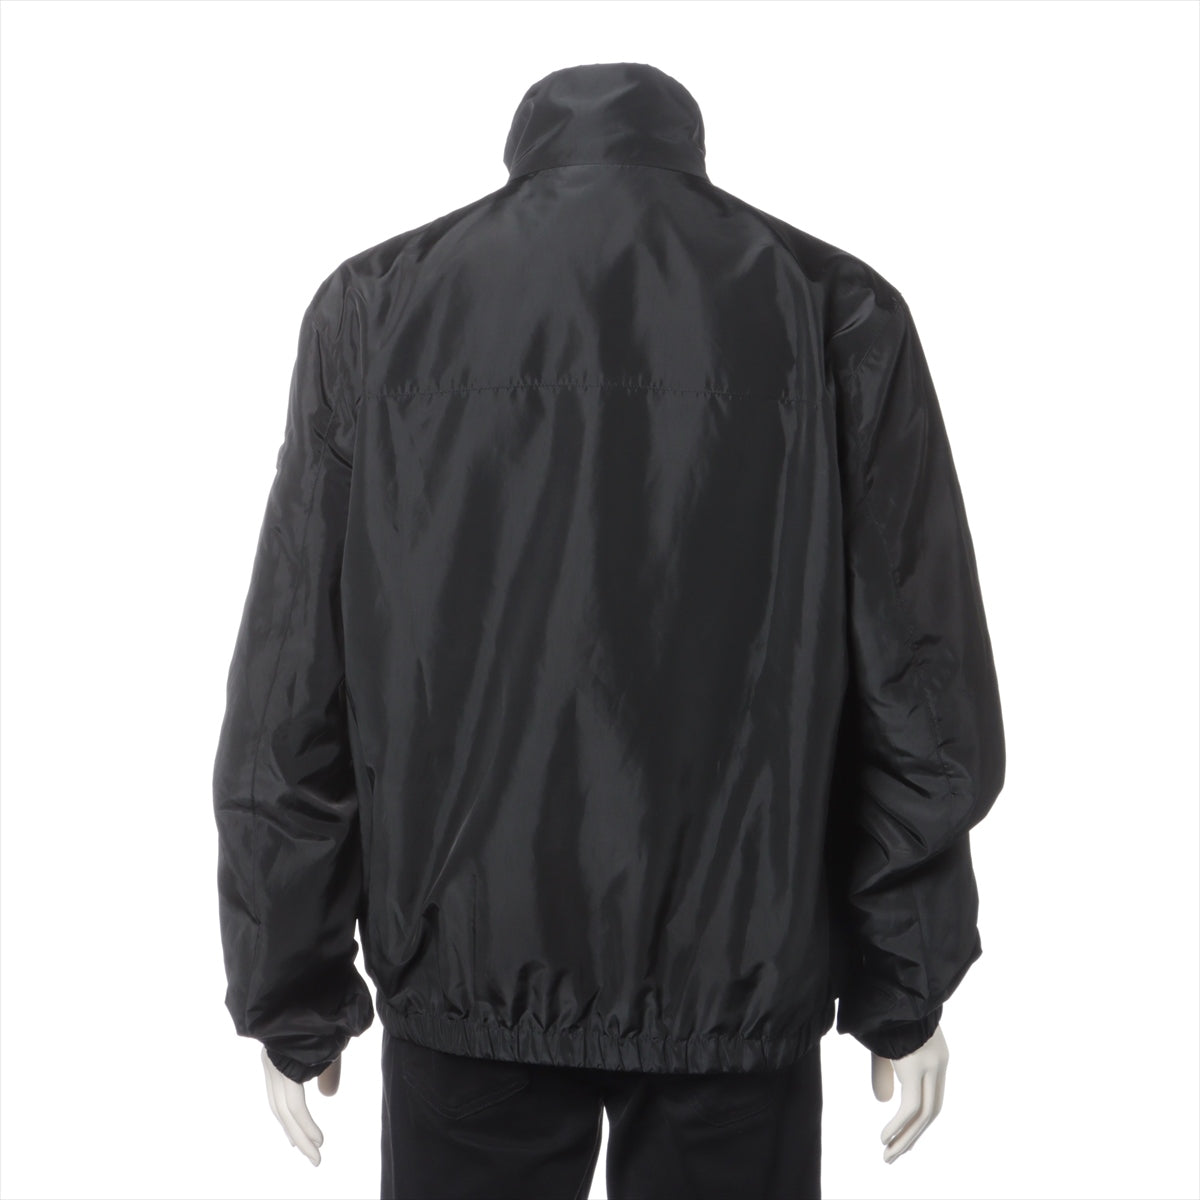 Prada Triangle Logo 22 Years Polyester Jacket 52 Men Black SGN521 SGN